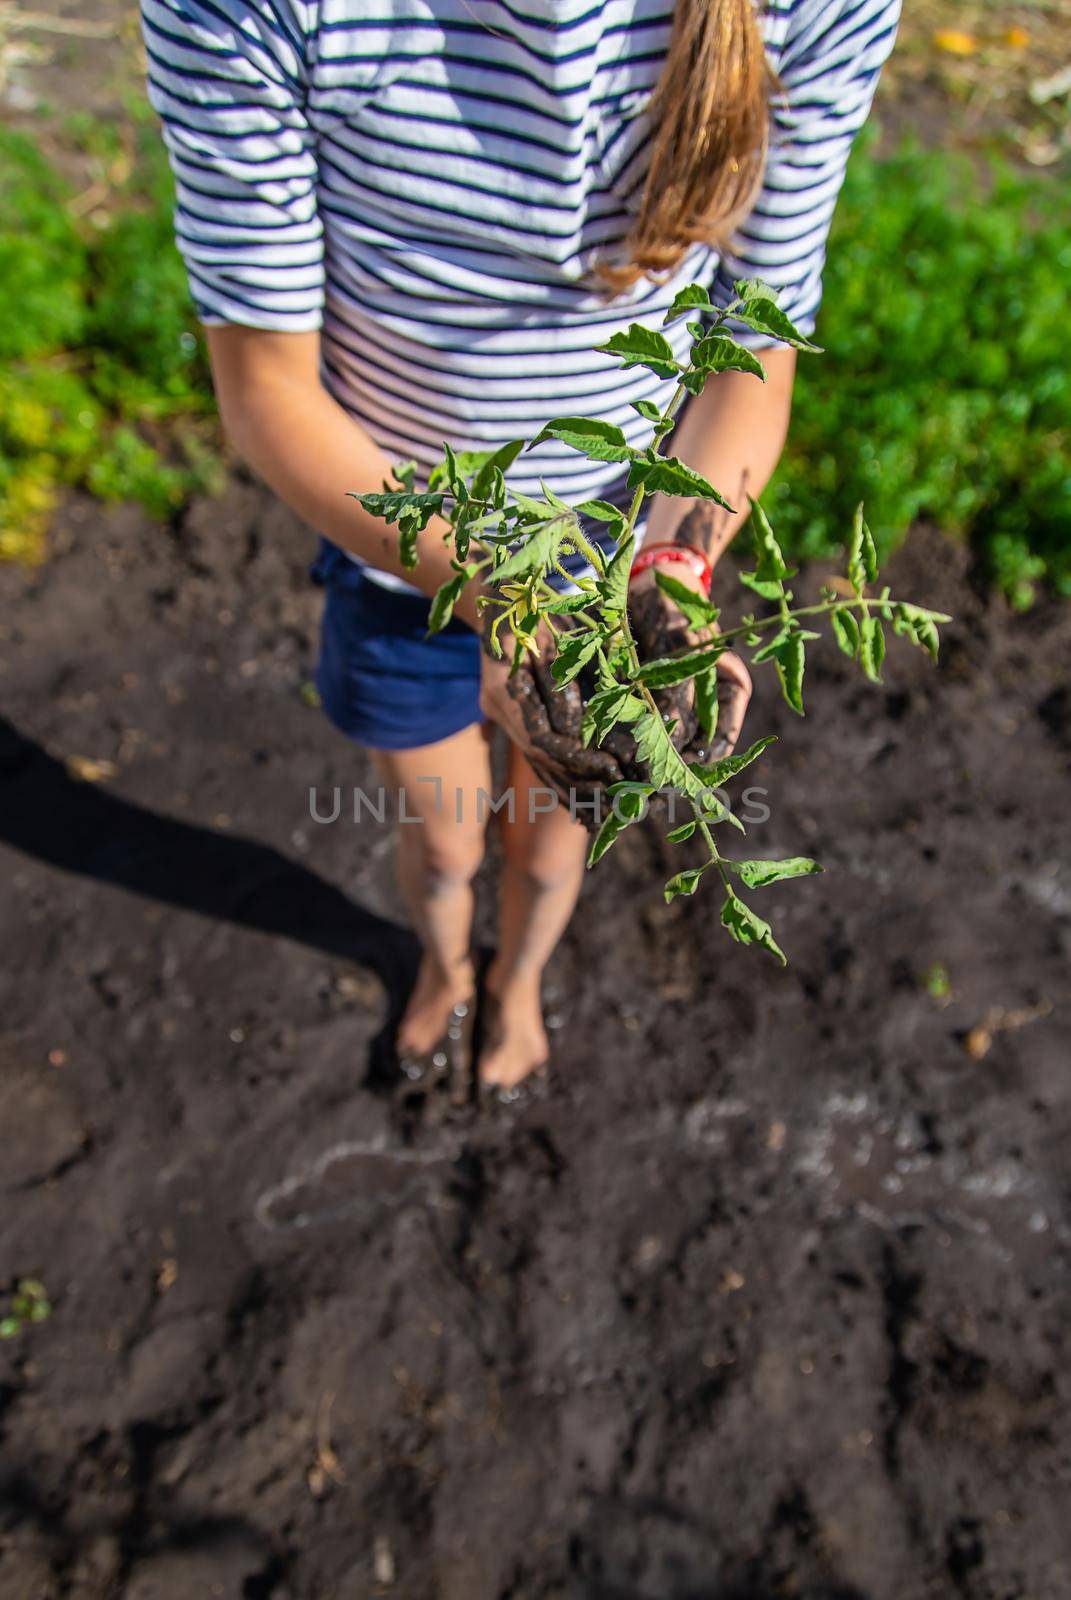 The child is planting a plant in the garden. Selective focus. by yanadjana